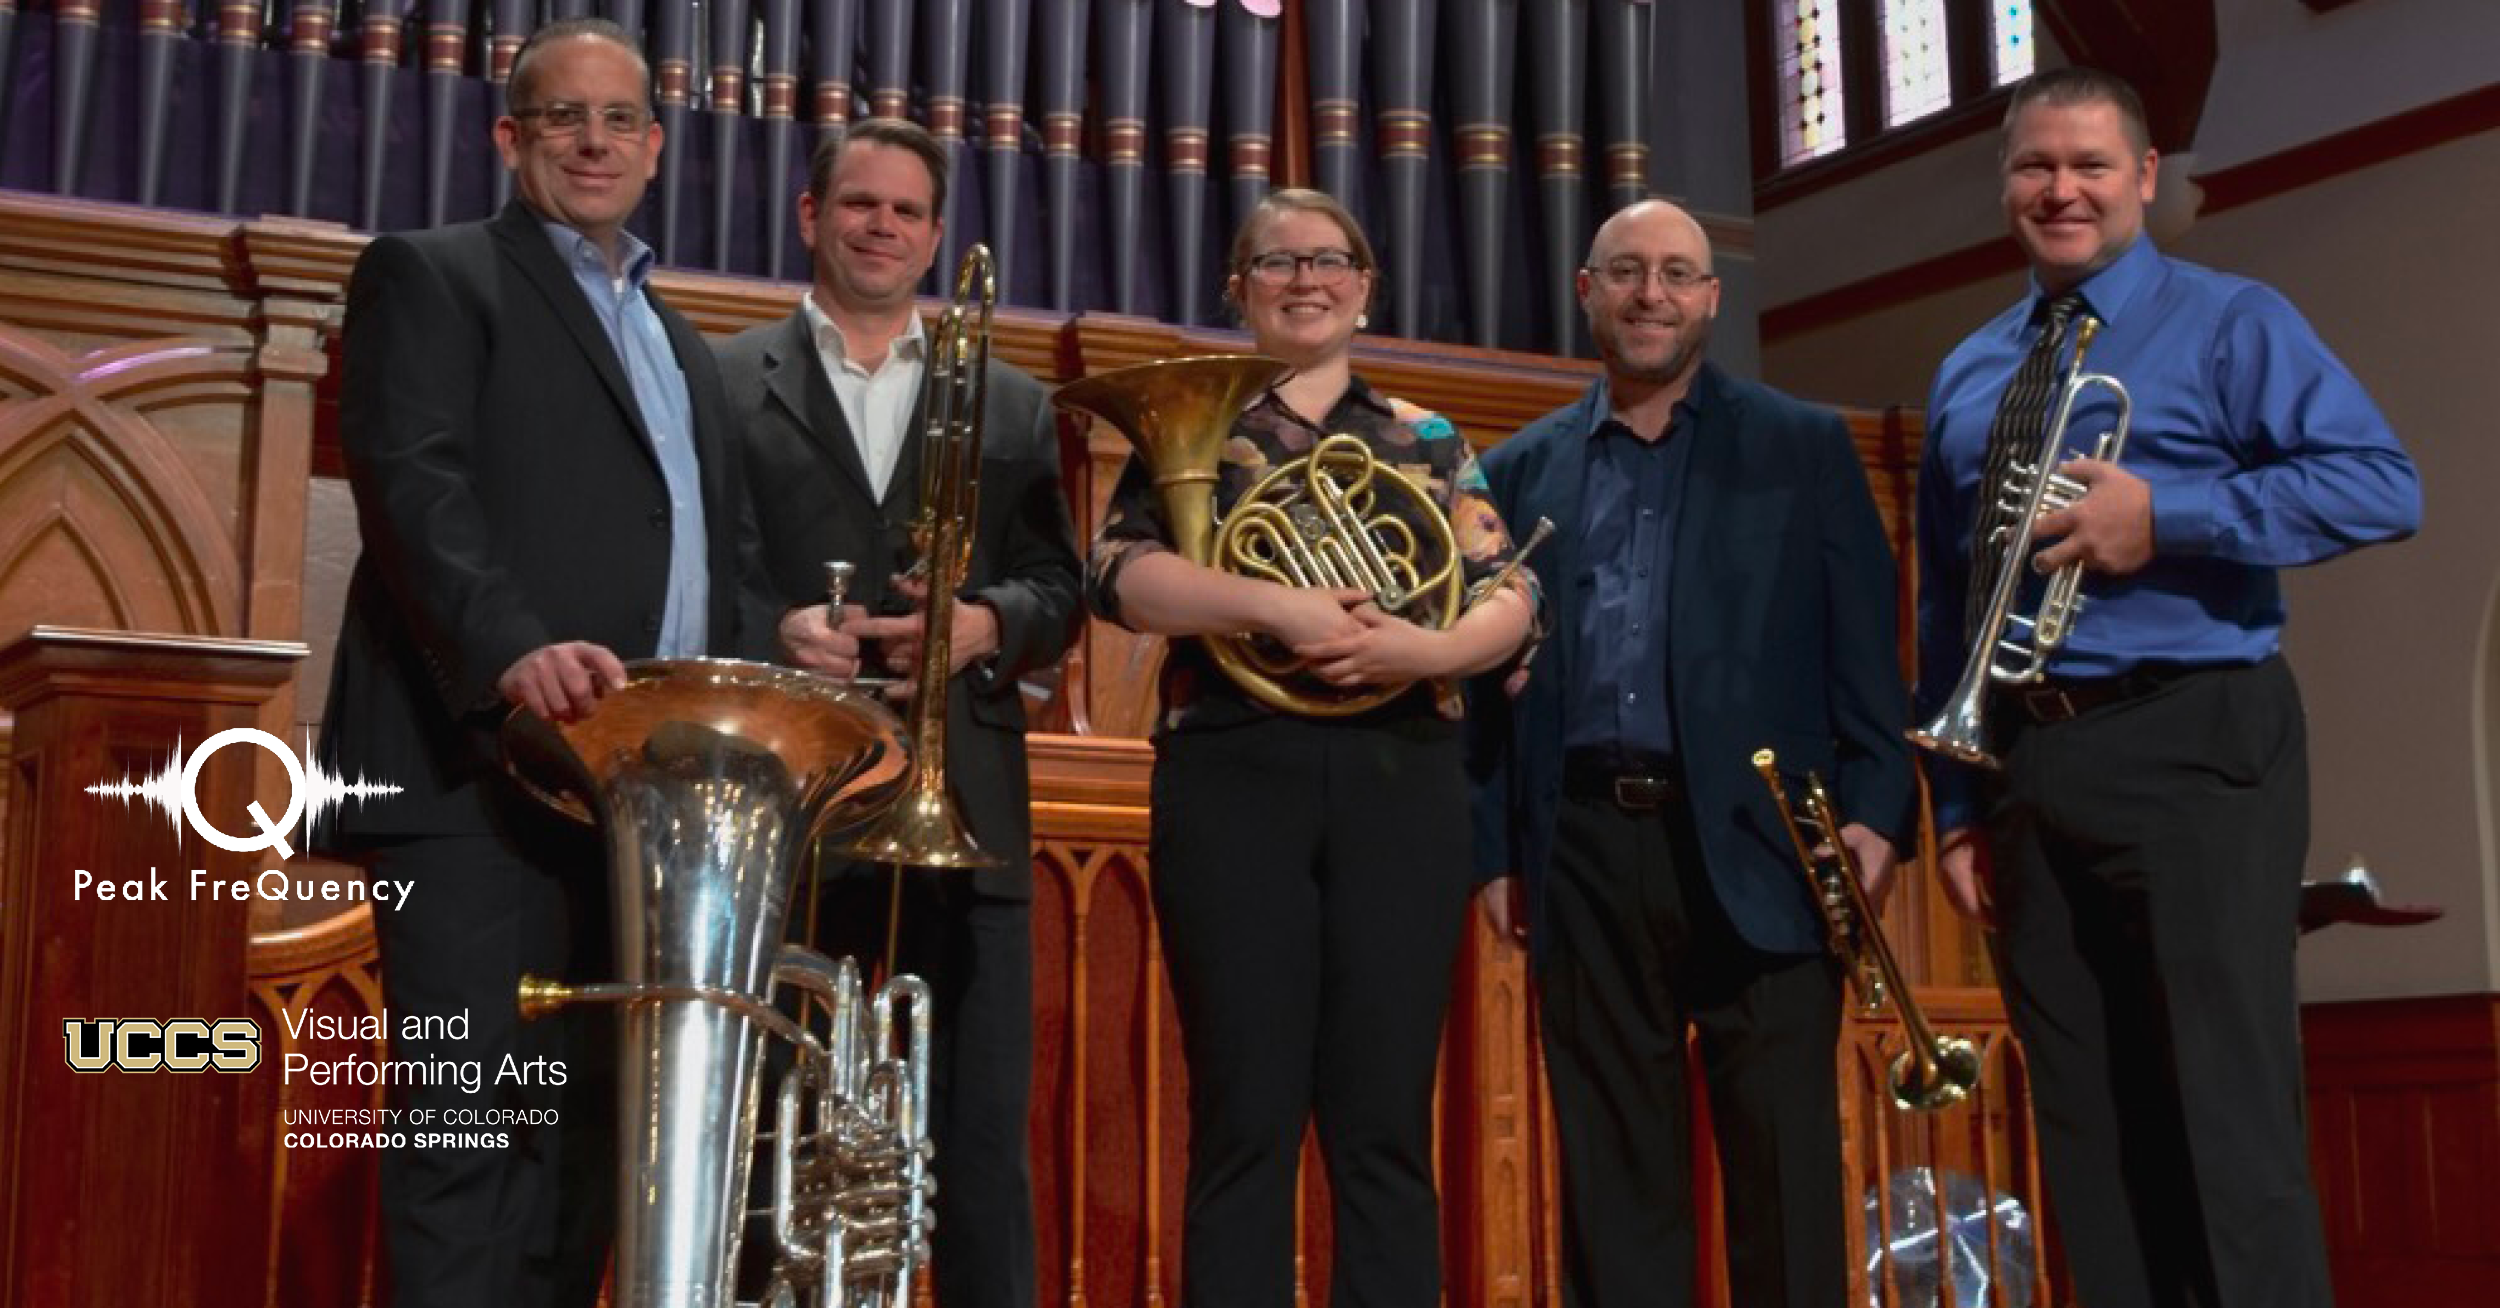 photo of nexus brass holding their instruments in the transept of a church